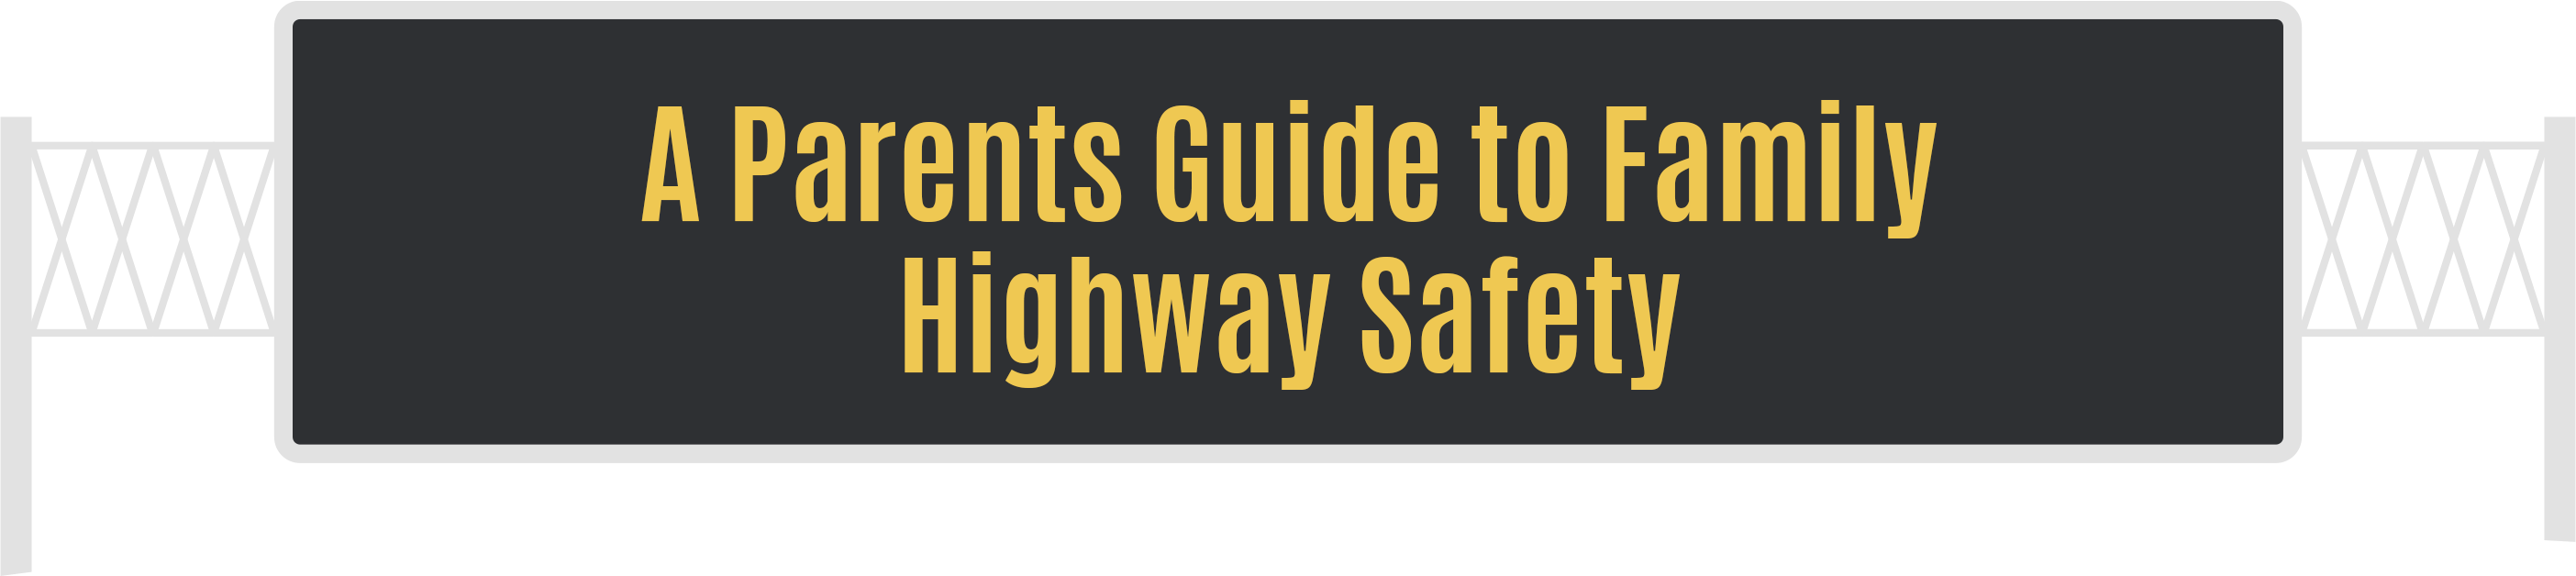 A Parents Guide to Family Highway Safety